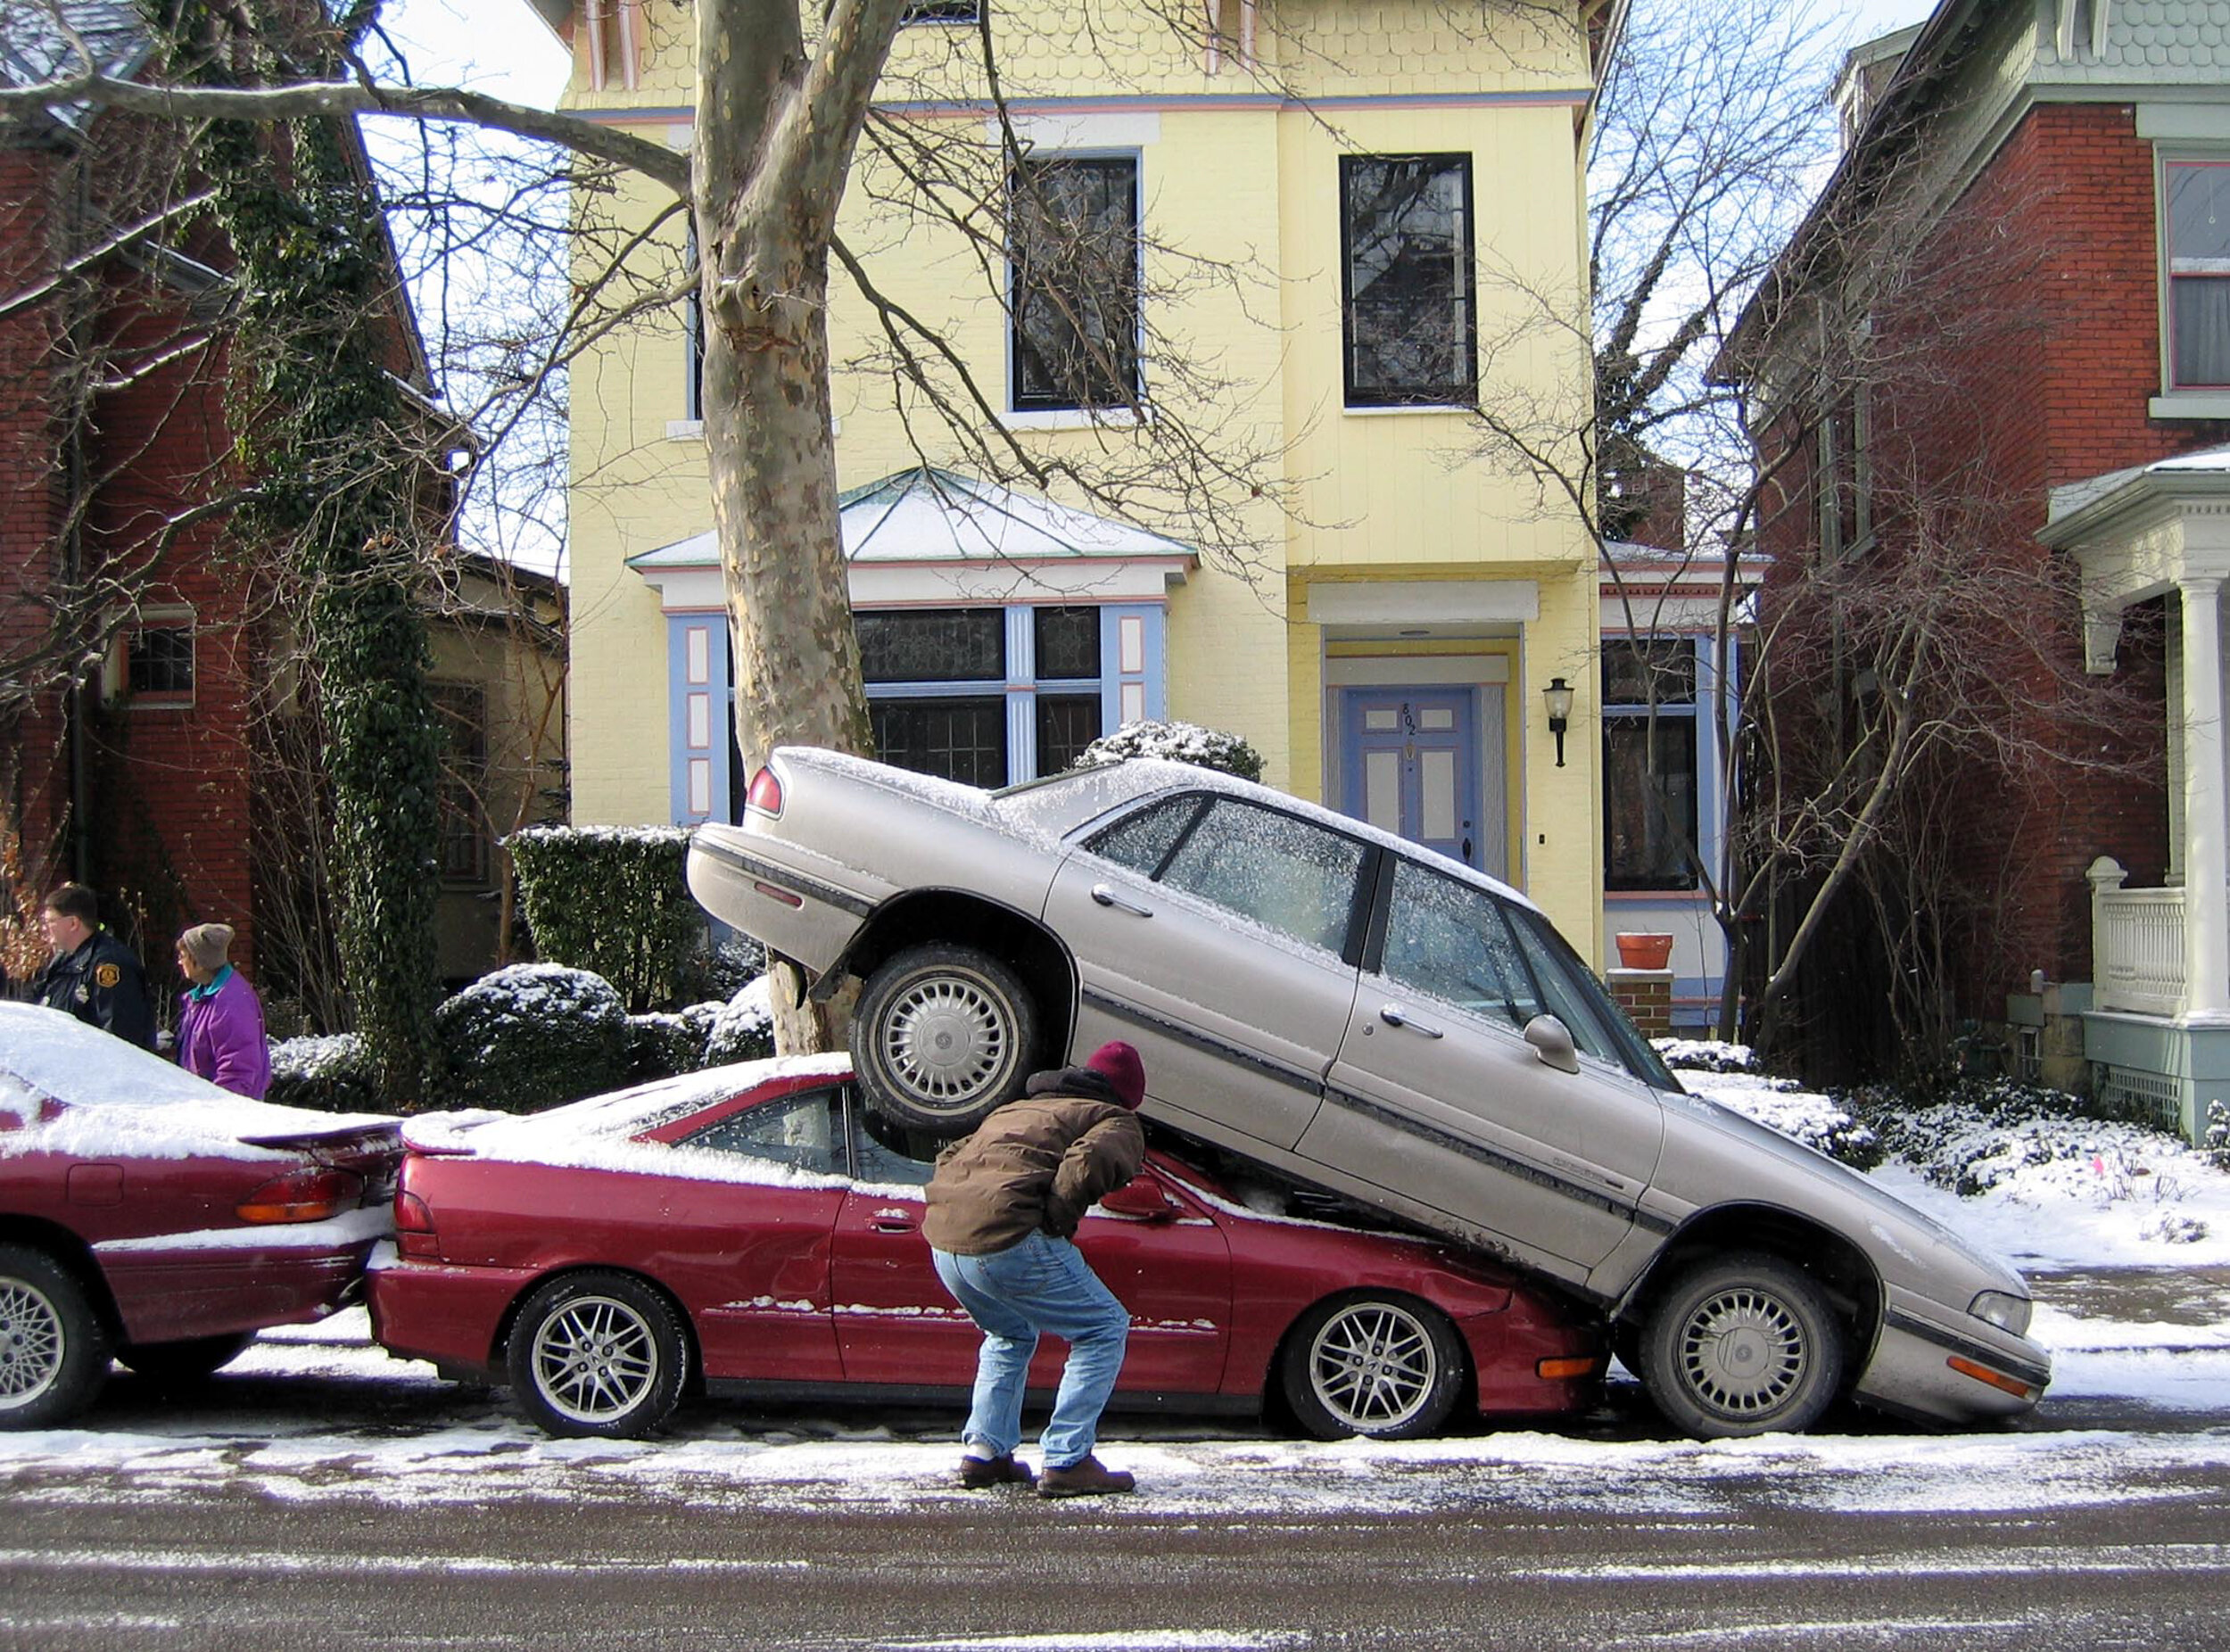  Car sandwich after car reversed over the top of another car, Pittsburgh, Pennsylvania.  Shot by Eleanor Bentall, London-based photographer. 